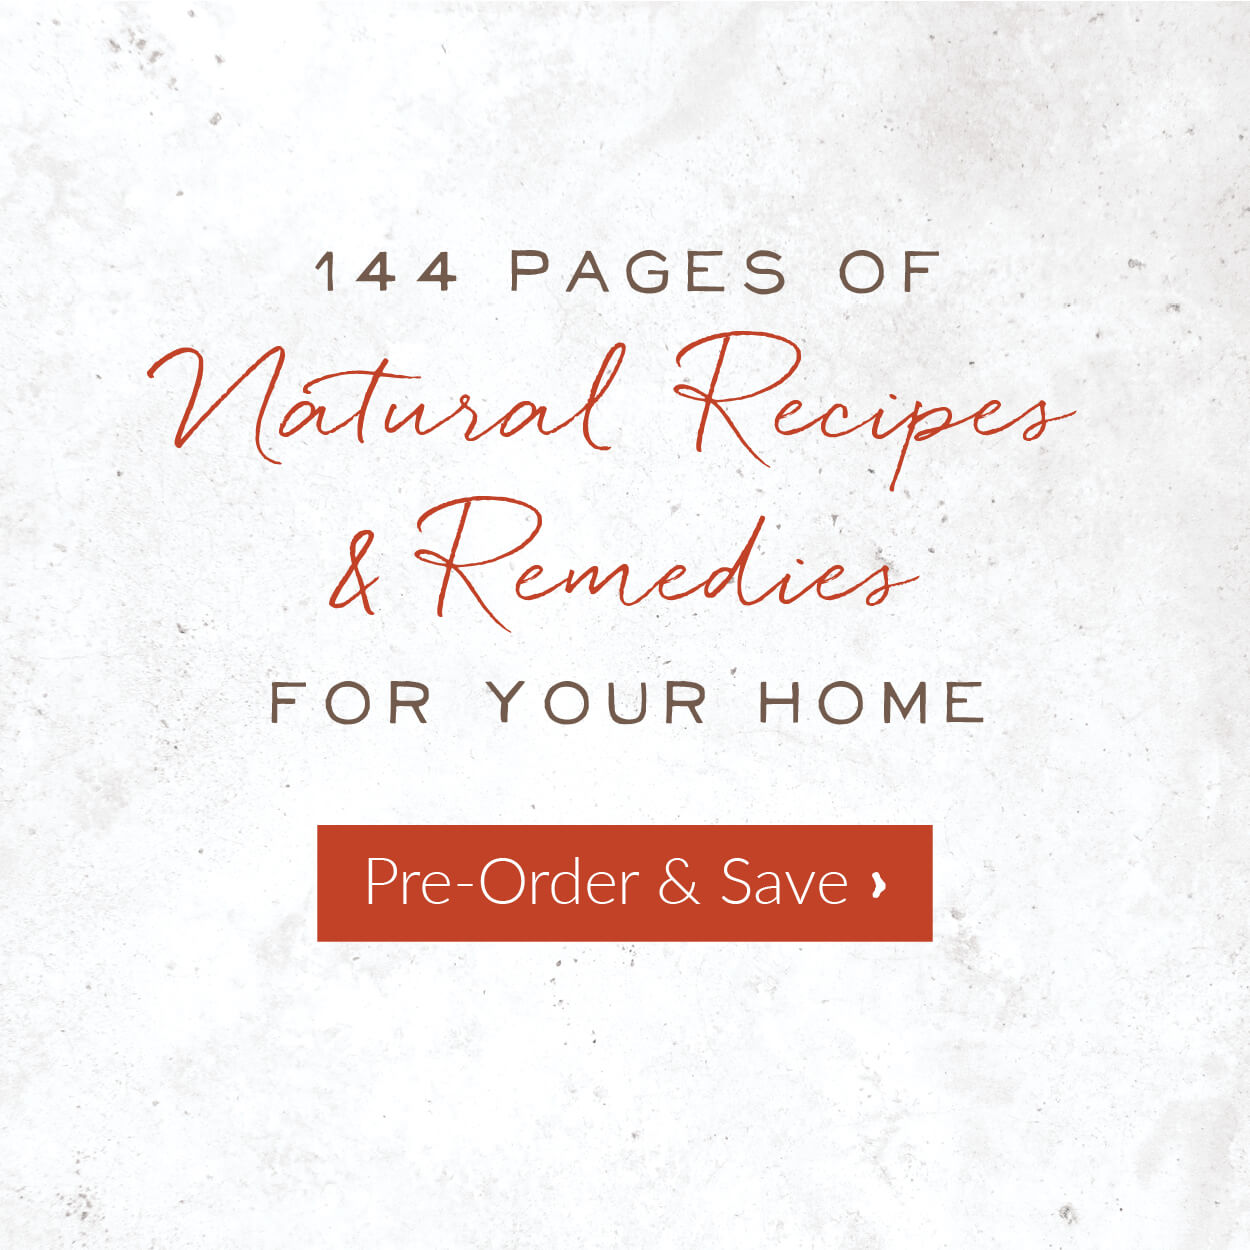 Natural Recipes and Remedies for Your Home